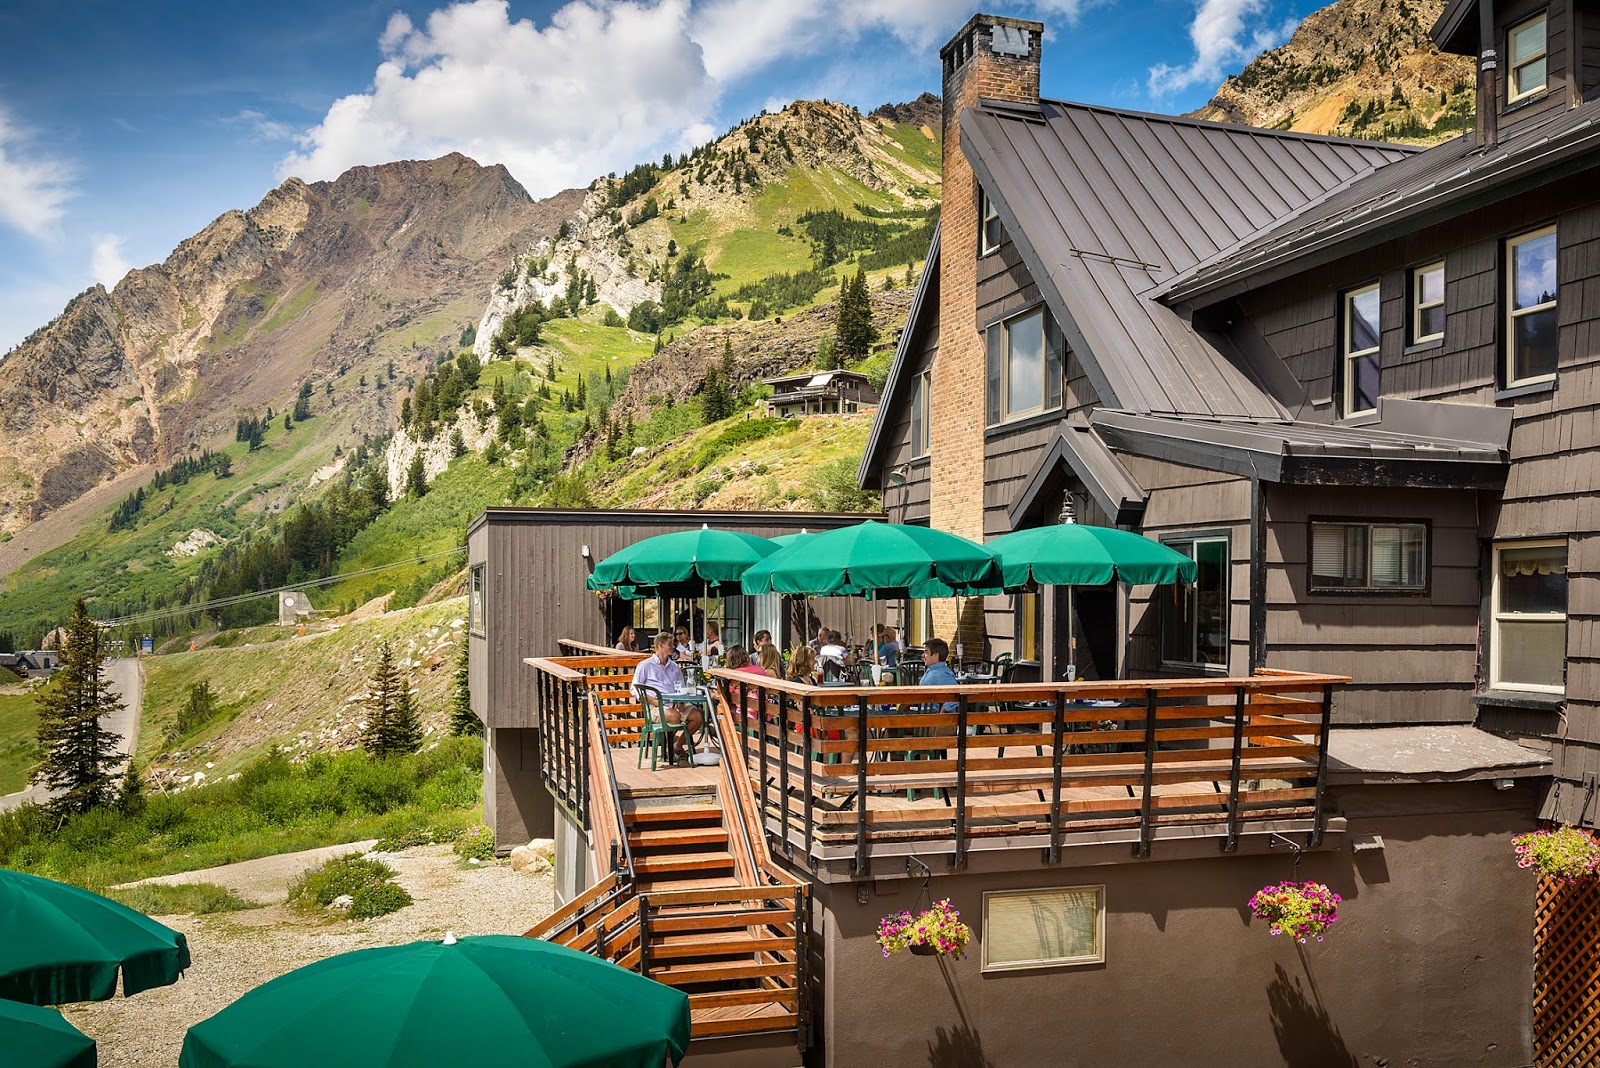 You can't beat the views at this Sunday Brunch at Alta Lodge